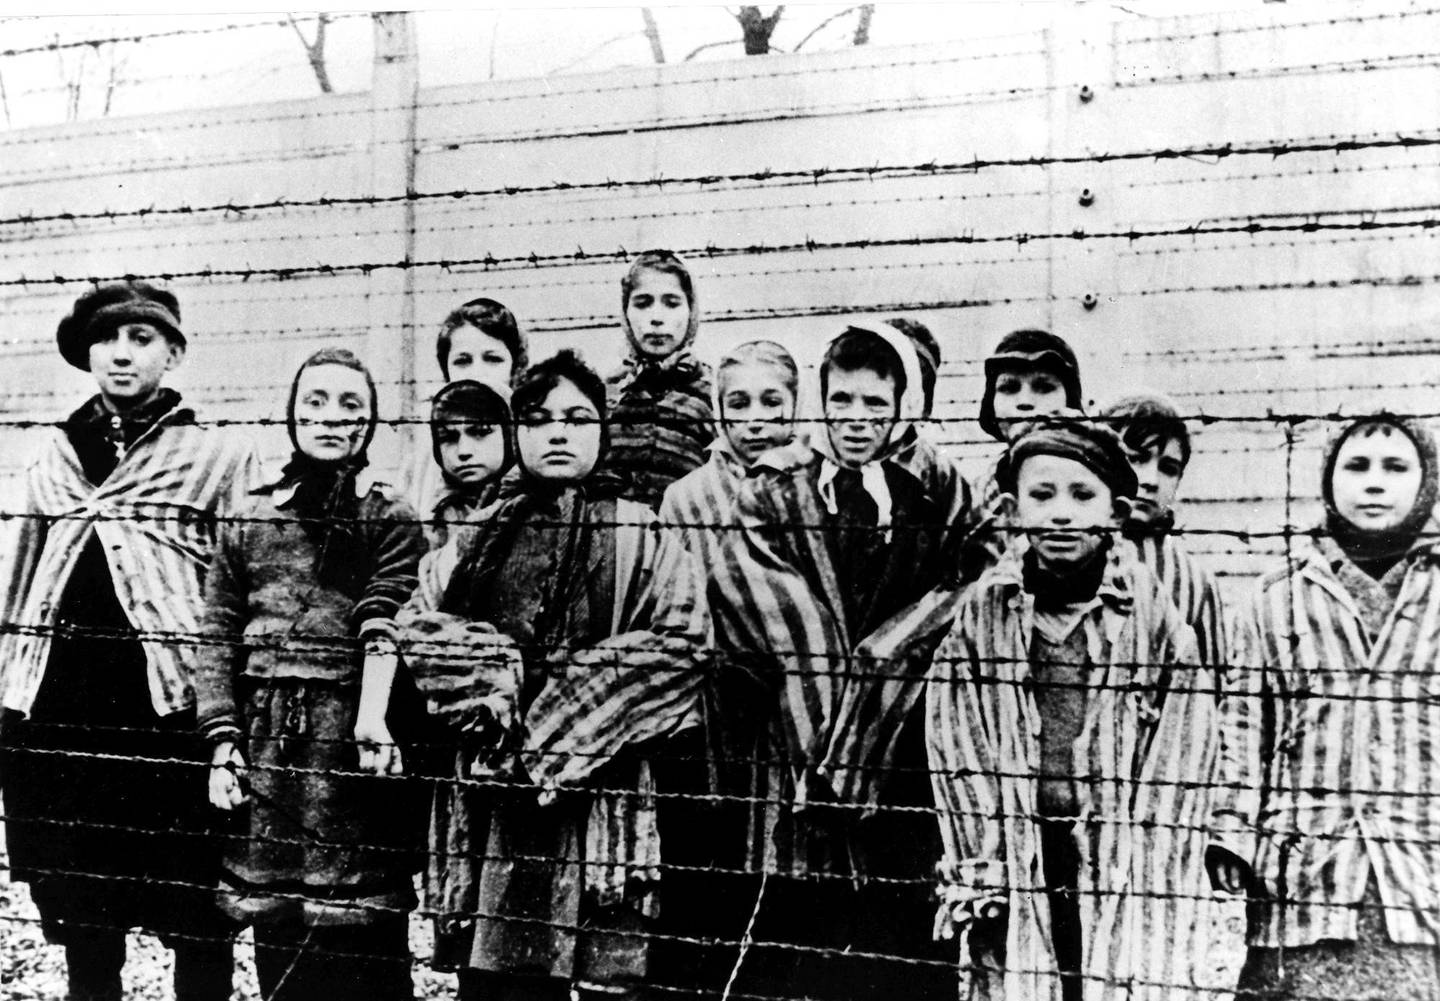 ** TO GO WITH STORY SLUGGED MIDEAST ISRAEL AUSCHWITZ SURVIVORS TALK** FILE ** A picture taken just after the liberation by the Soviet army in January, 1945, shows a group of children wearing concentration camp uniforms including Martha Weiss who was ten years-old, 6th from right, at the time behind barbed wire fencing in the Oswiecim (Auschwitz) nazi concentration camp. 60 years ago, on January 27, 1945, Red Army soldiers liberated the Concentration Camp in Auschwitz, Poland. Like all children too young to work, 10-year-old Martha Weiss was selected  for death when she arrived at Auschwitz in 1944 but said the SS diverted her  group from the gas chamber after Russian planes flew over. She said she and her  older sister Eva spent their last month before liberation in Mengele's notorious  experimental ward. (AP Photo/CAF pap) ** B/W ONLY **